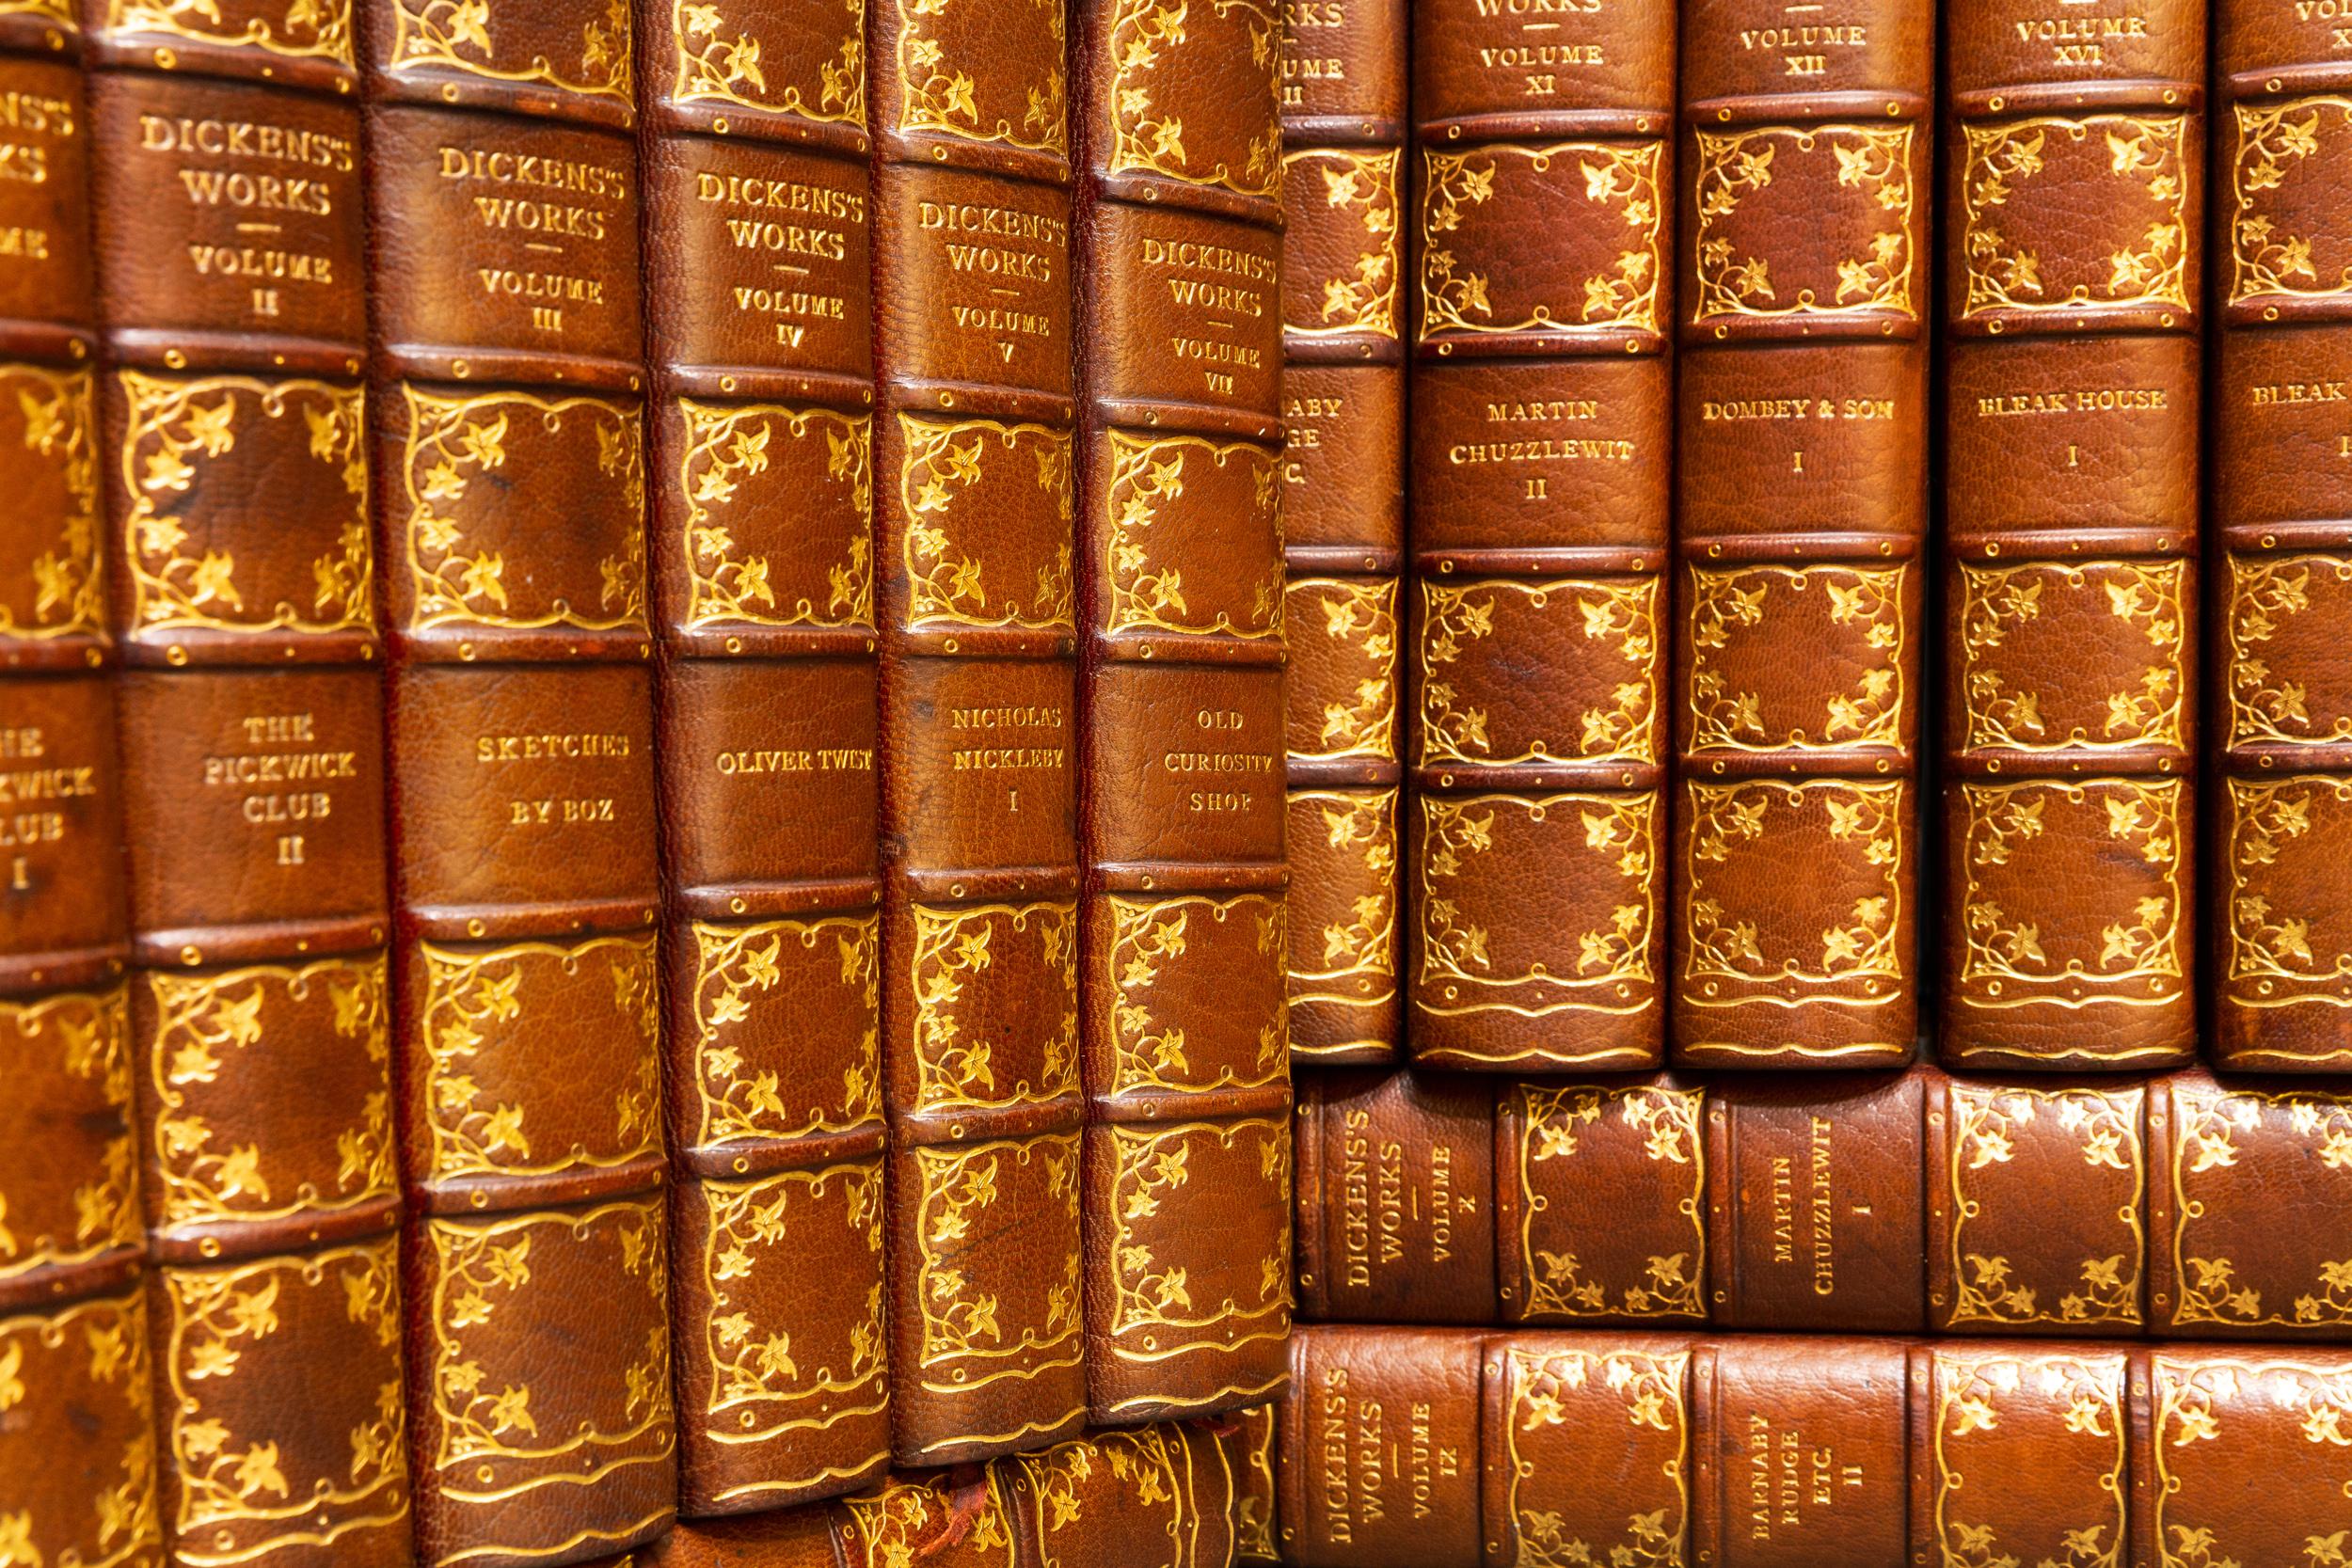 32 Volumes. Charles Dickens. The Complete Works.volume one with an original letter by Charles Dickens Bound in 3/4 brown morocco. Top edges gilt. Raised bands. Illustrated. Gilt tooling on spine. Published: Boston & New York; Houghton, Mifflin and